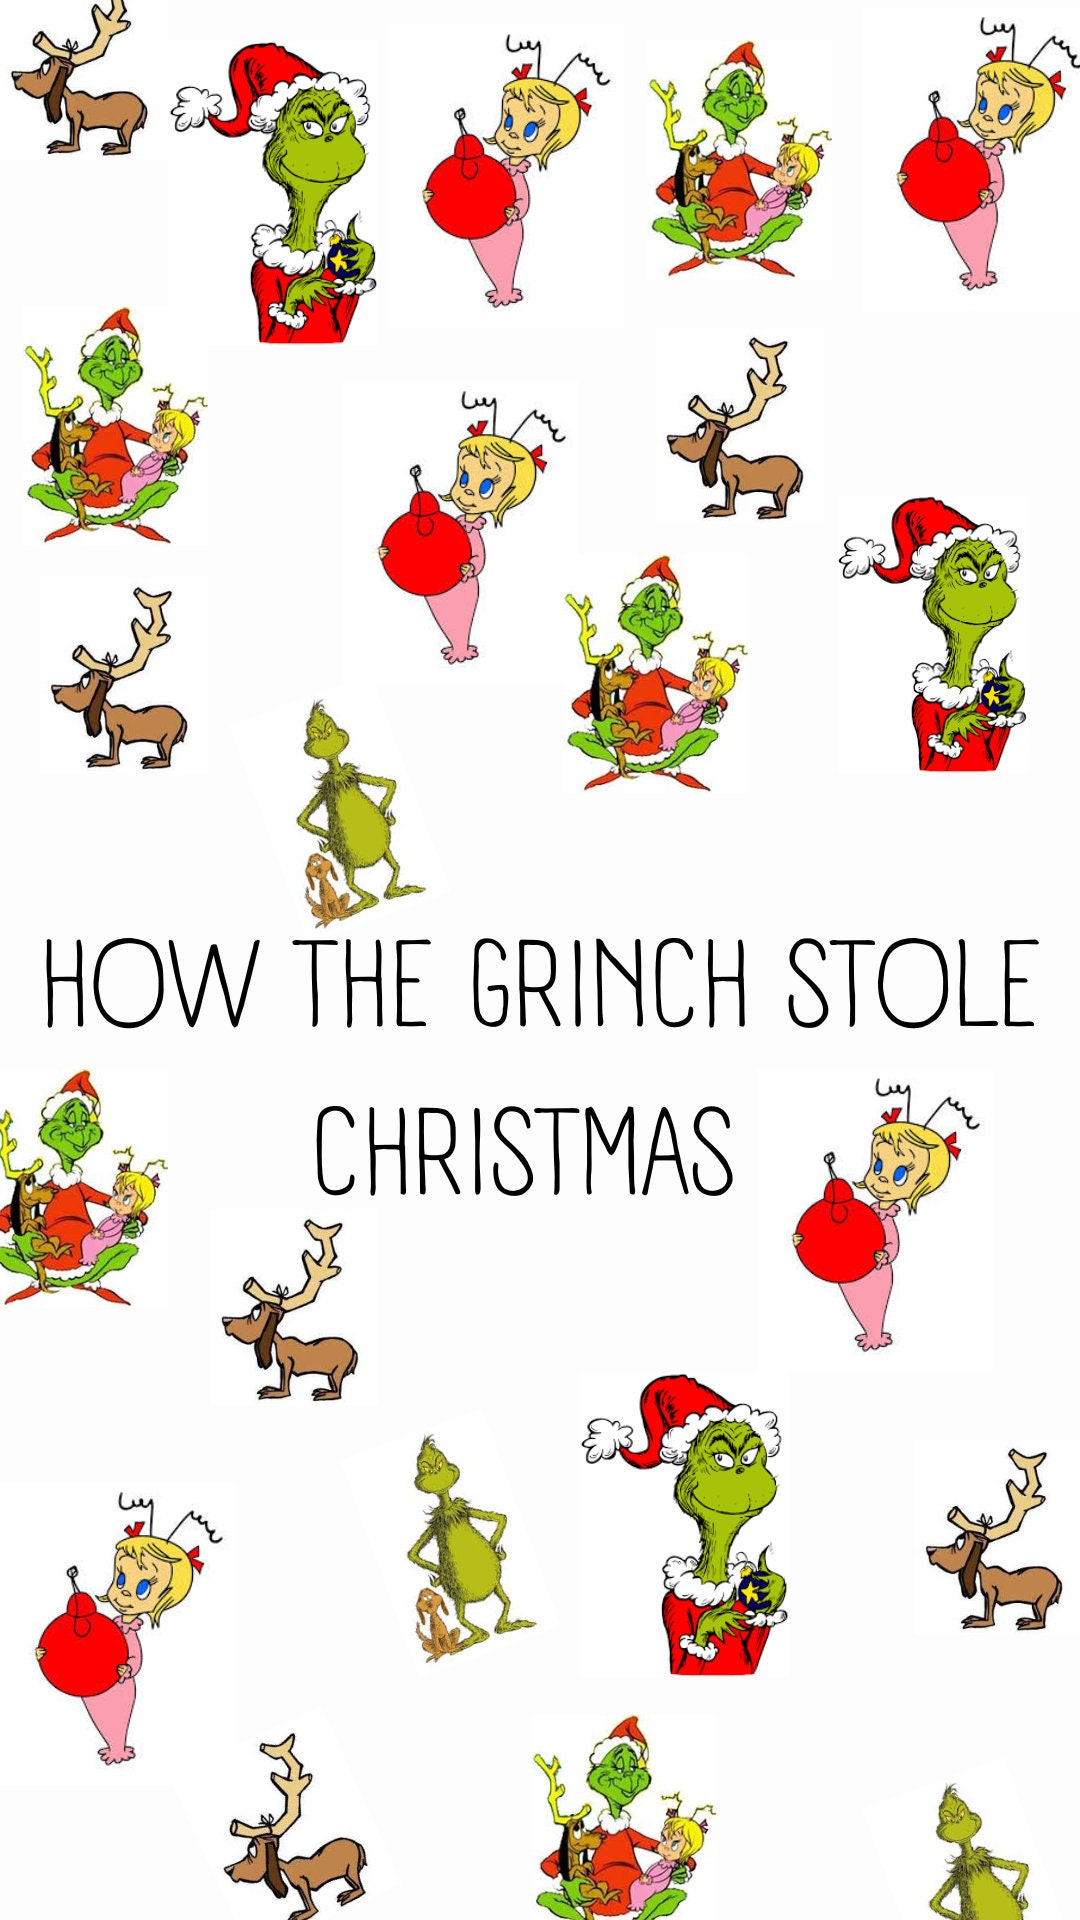 The Grinch Christmas Is Stolen In The New Trailer  Movies   channelname